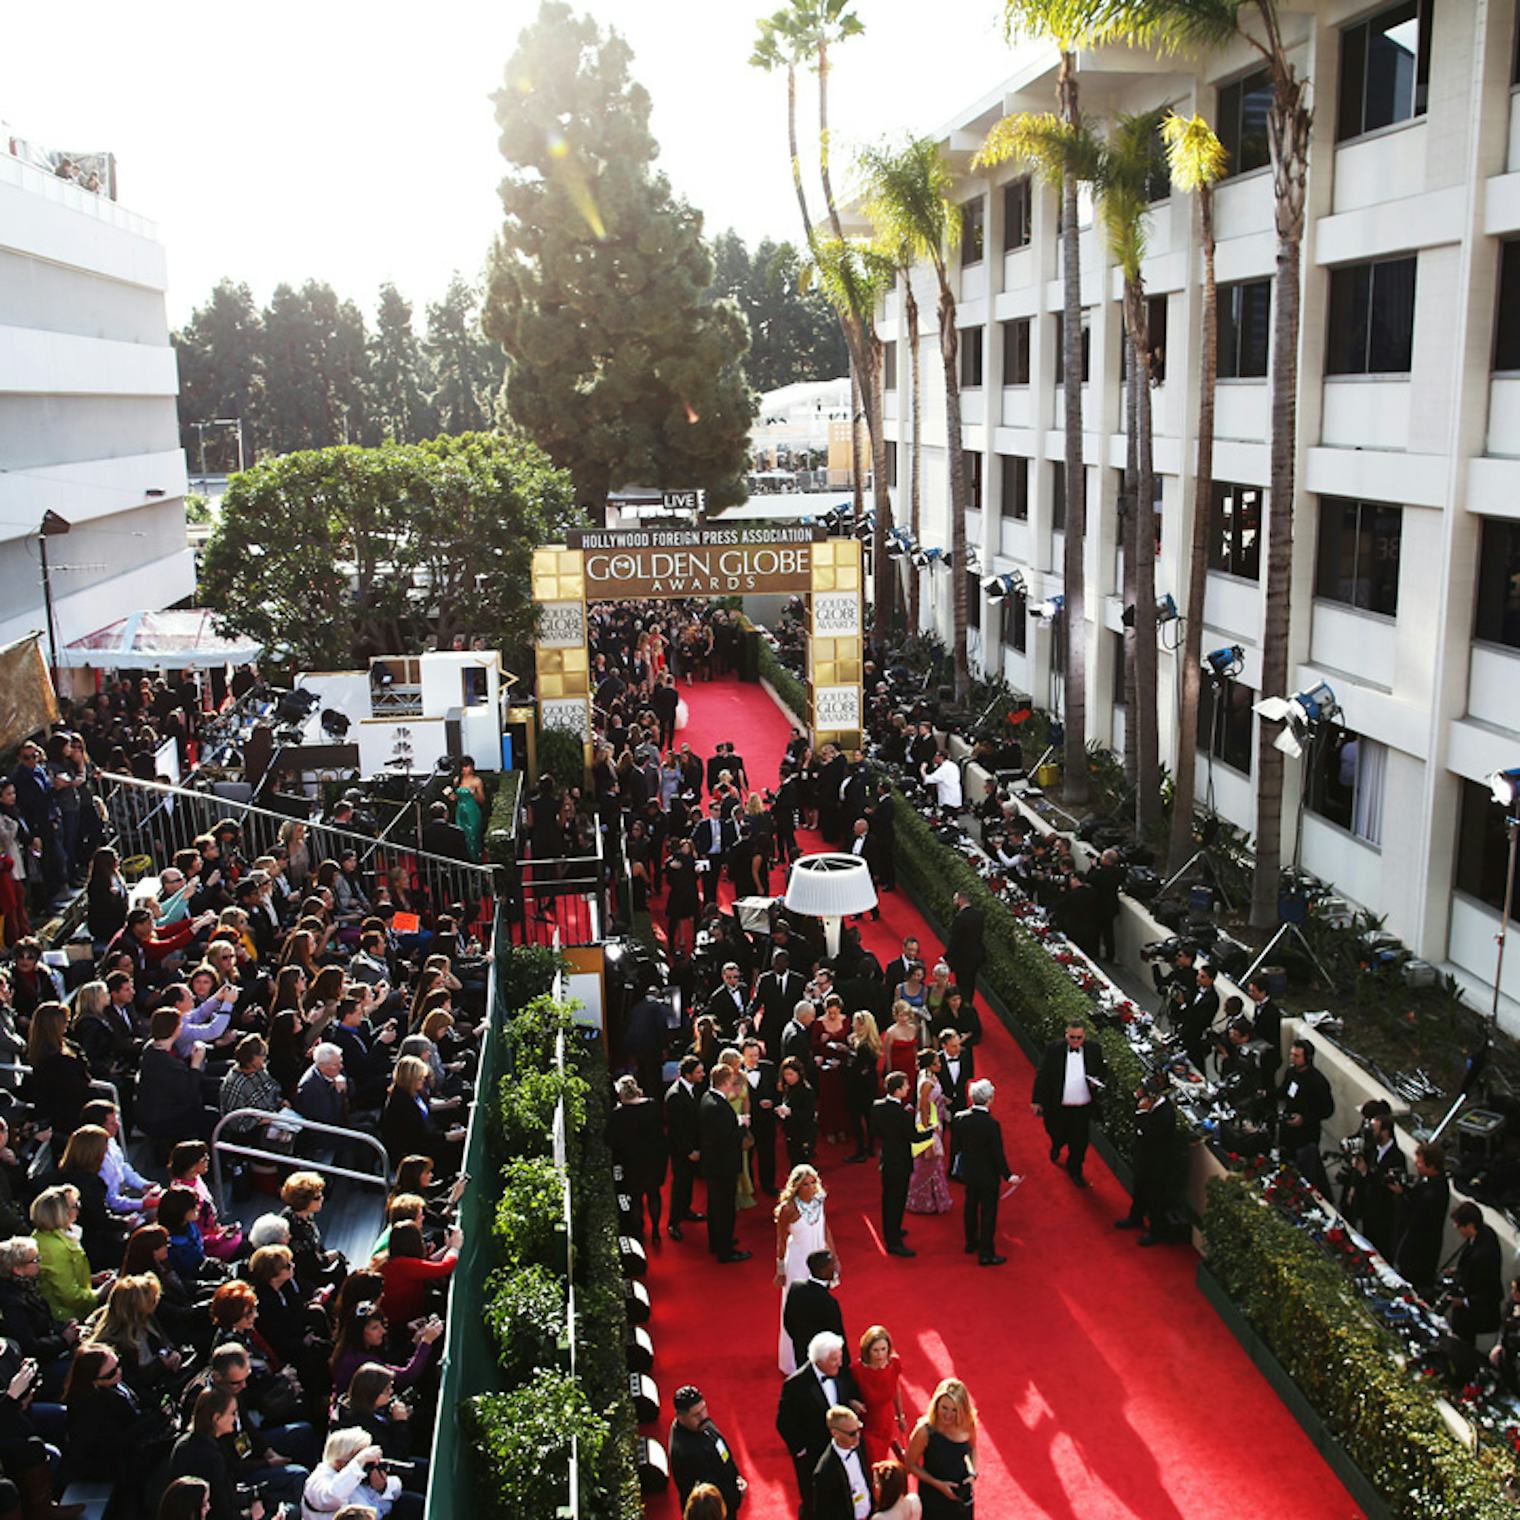 Golden Globe Awards 10 Things You Didn’t Know